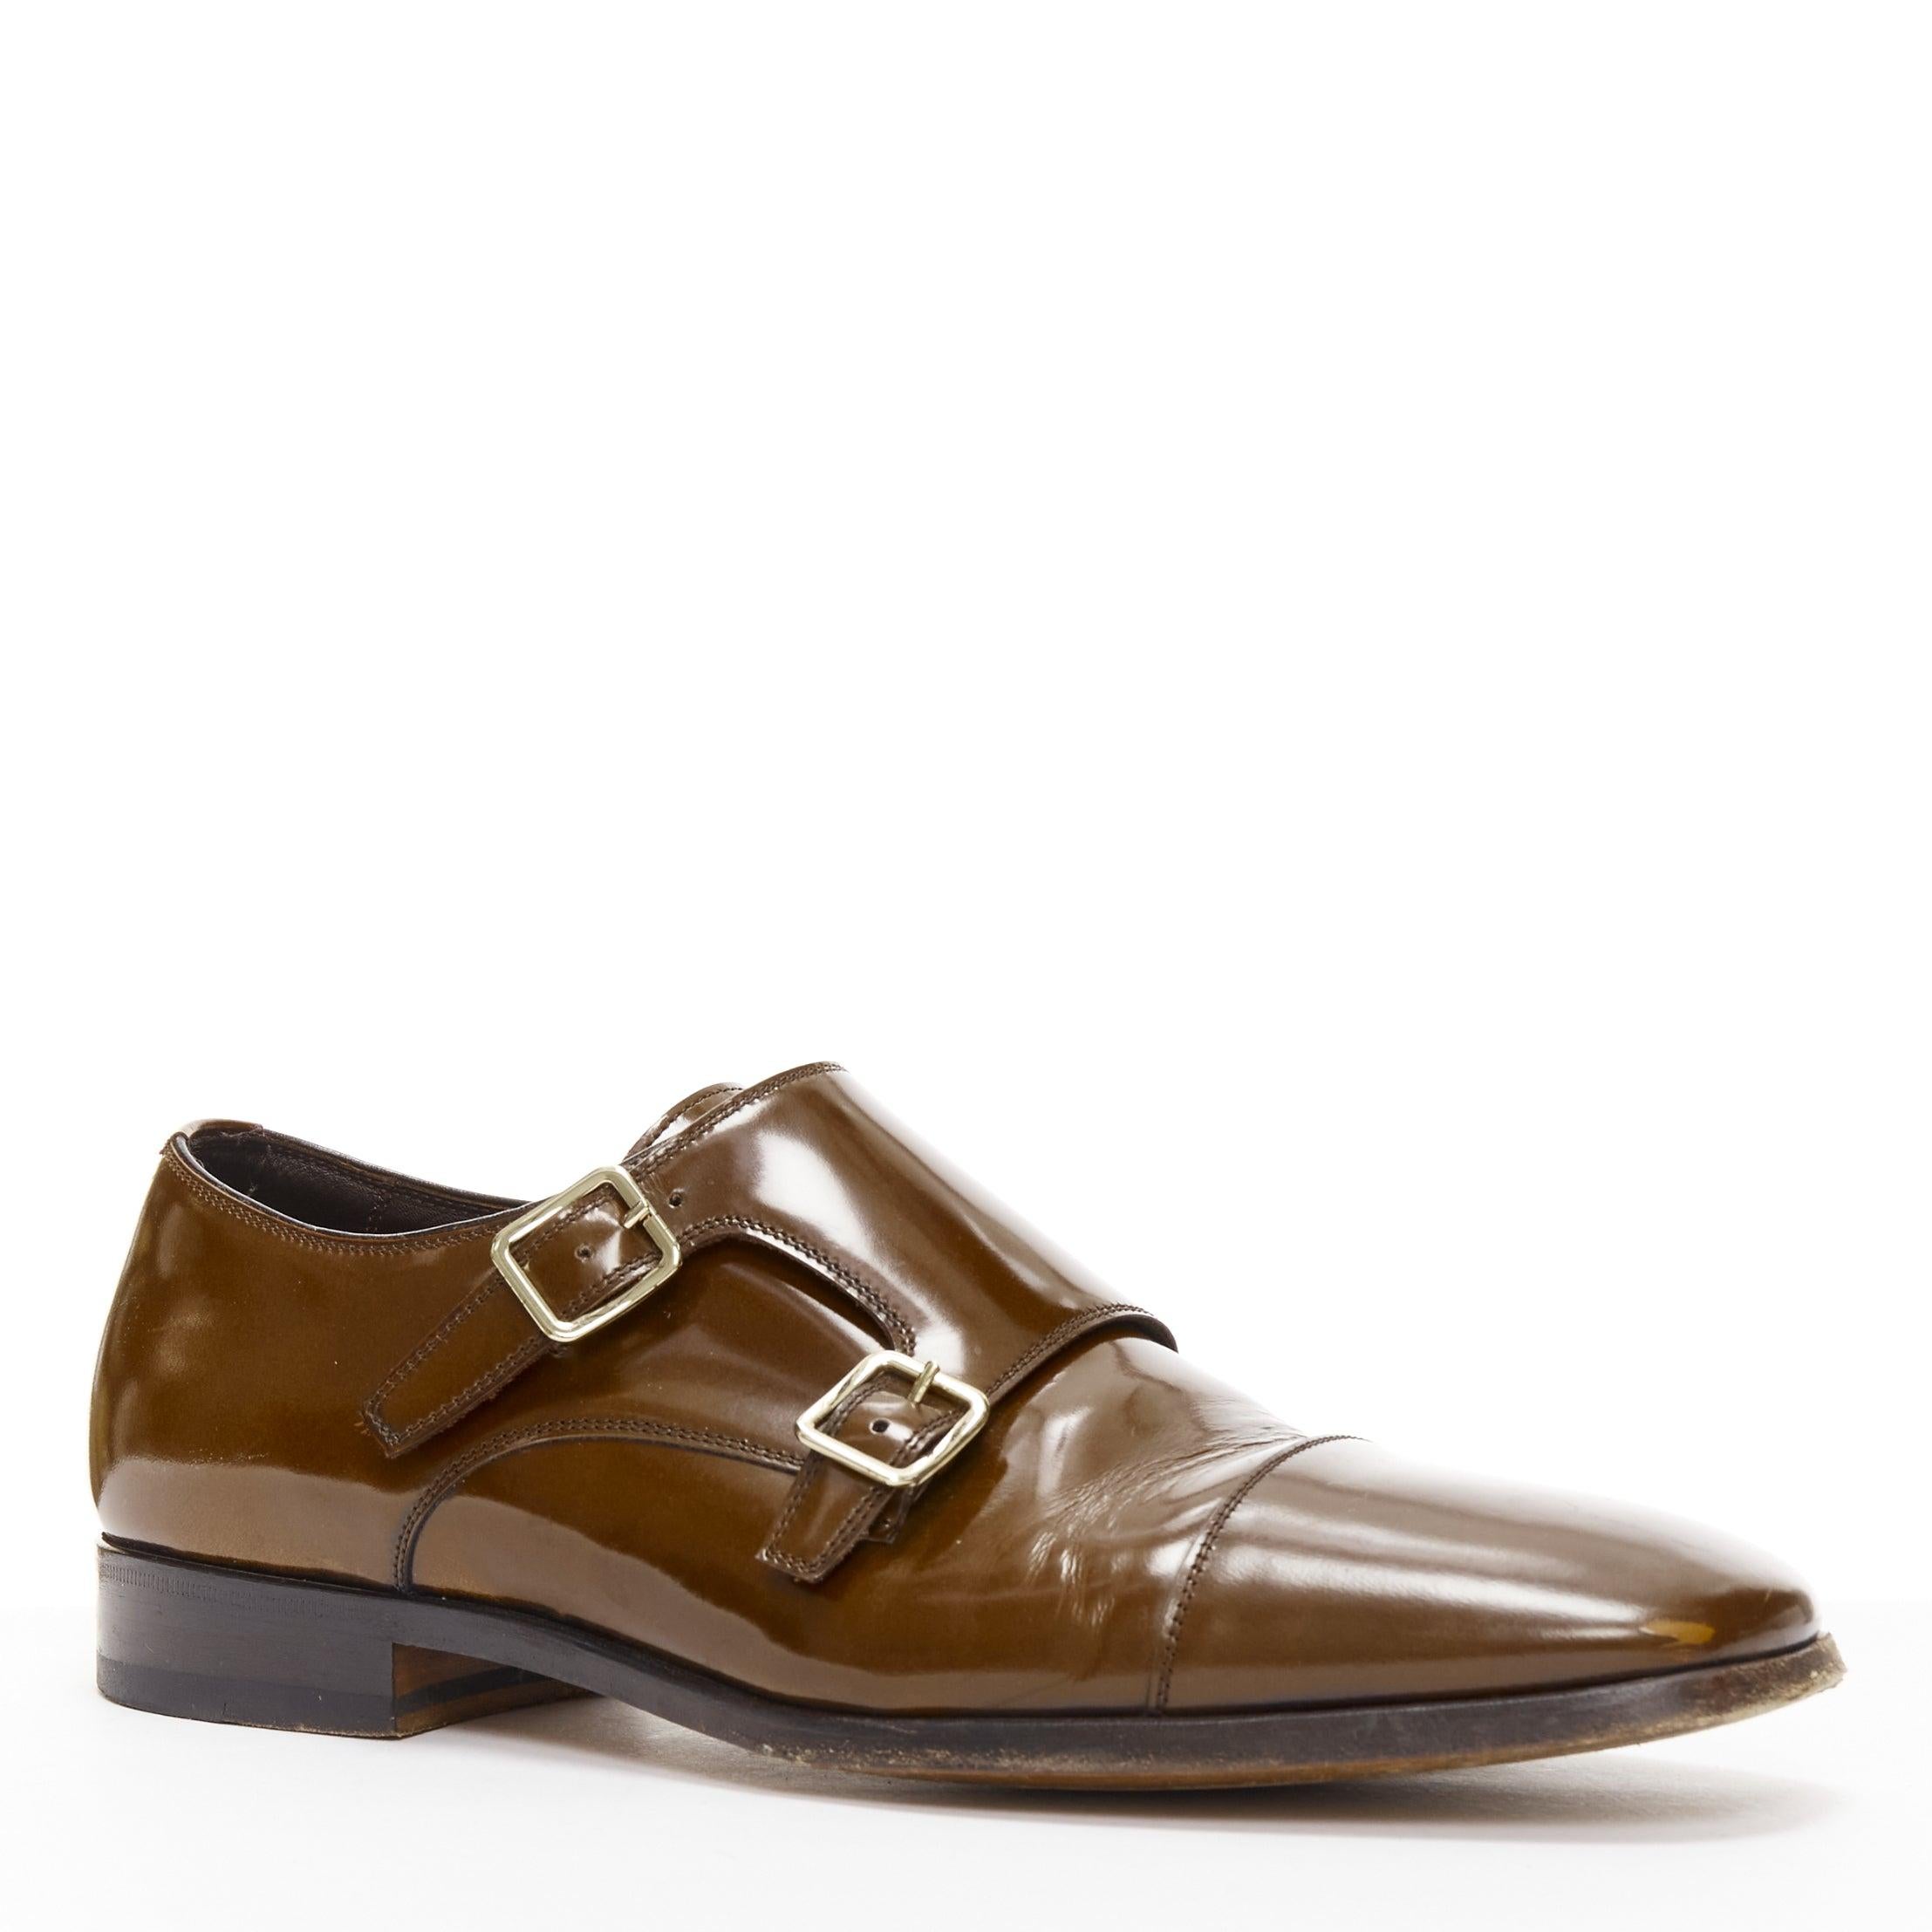 TOM FORD Spazzolato brown leather buckles monk strap loafers UK7 EU41
Reference: YIKK/A00036
Brand: Tom Ford
Designer: Tom Ford
Material: Leather
Color: Brown
Pattern: Solid
Closure: Buckle
Lining: Black Leather
Extra Details: In terms of how formal